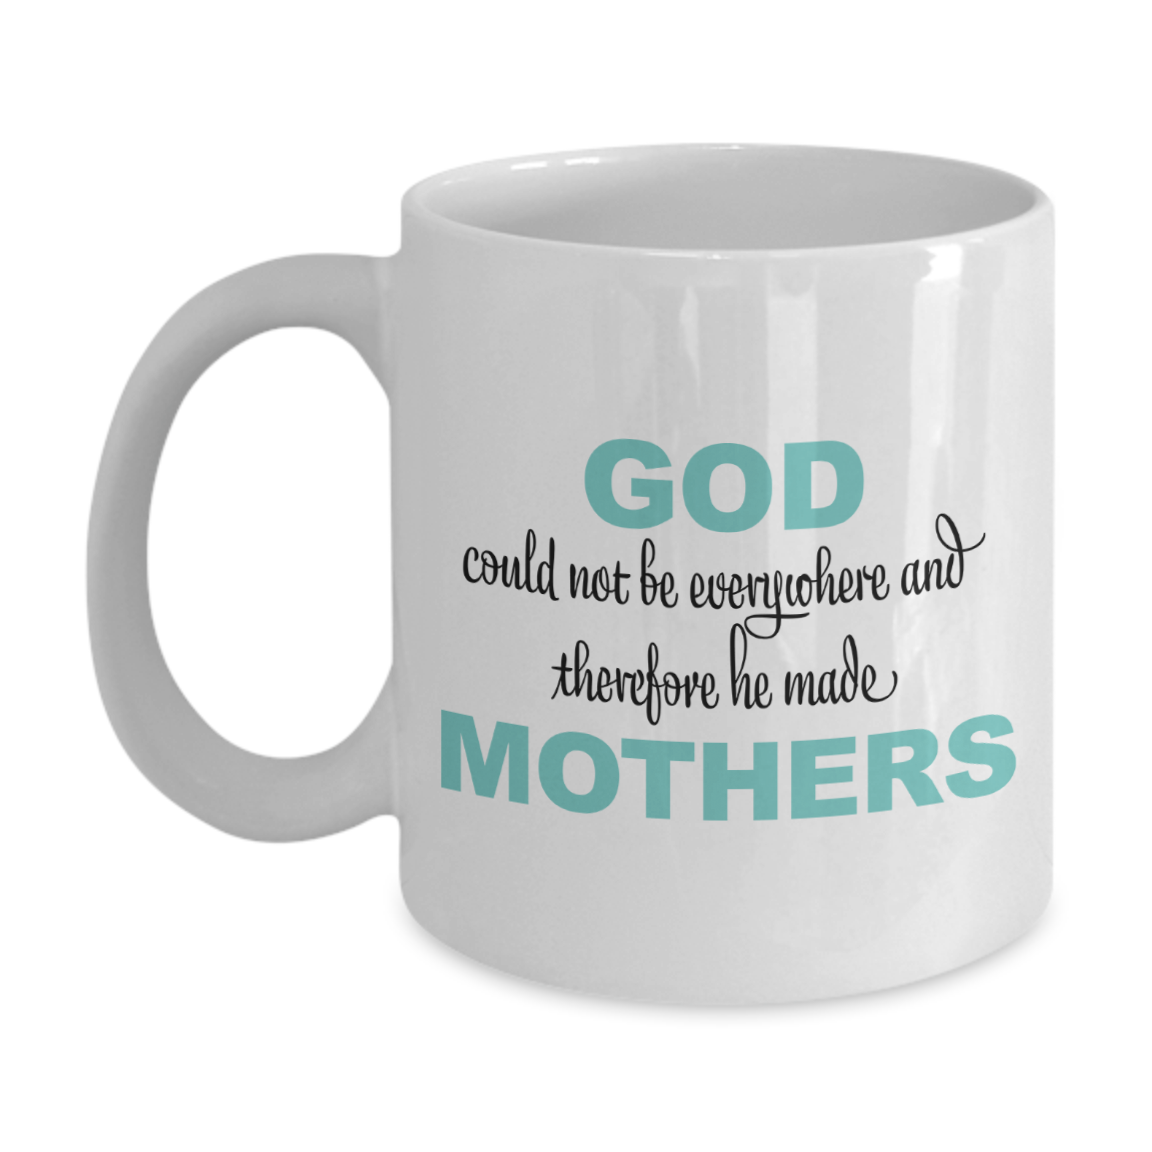 God and Mothers - Inspirational Family Quotes Coffee Mug